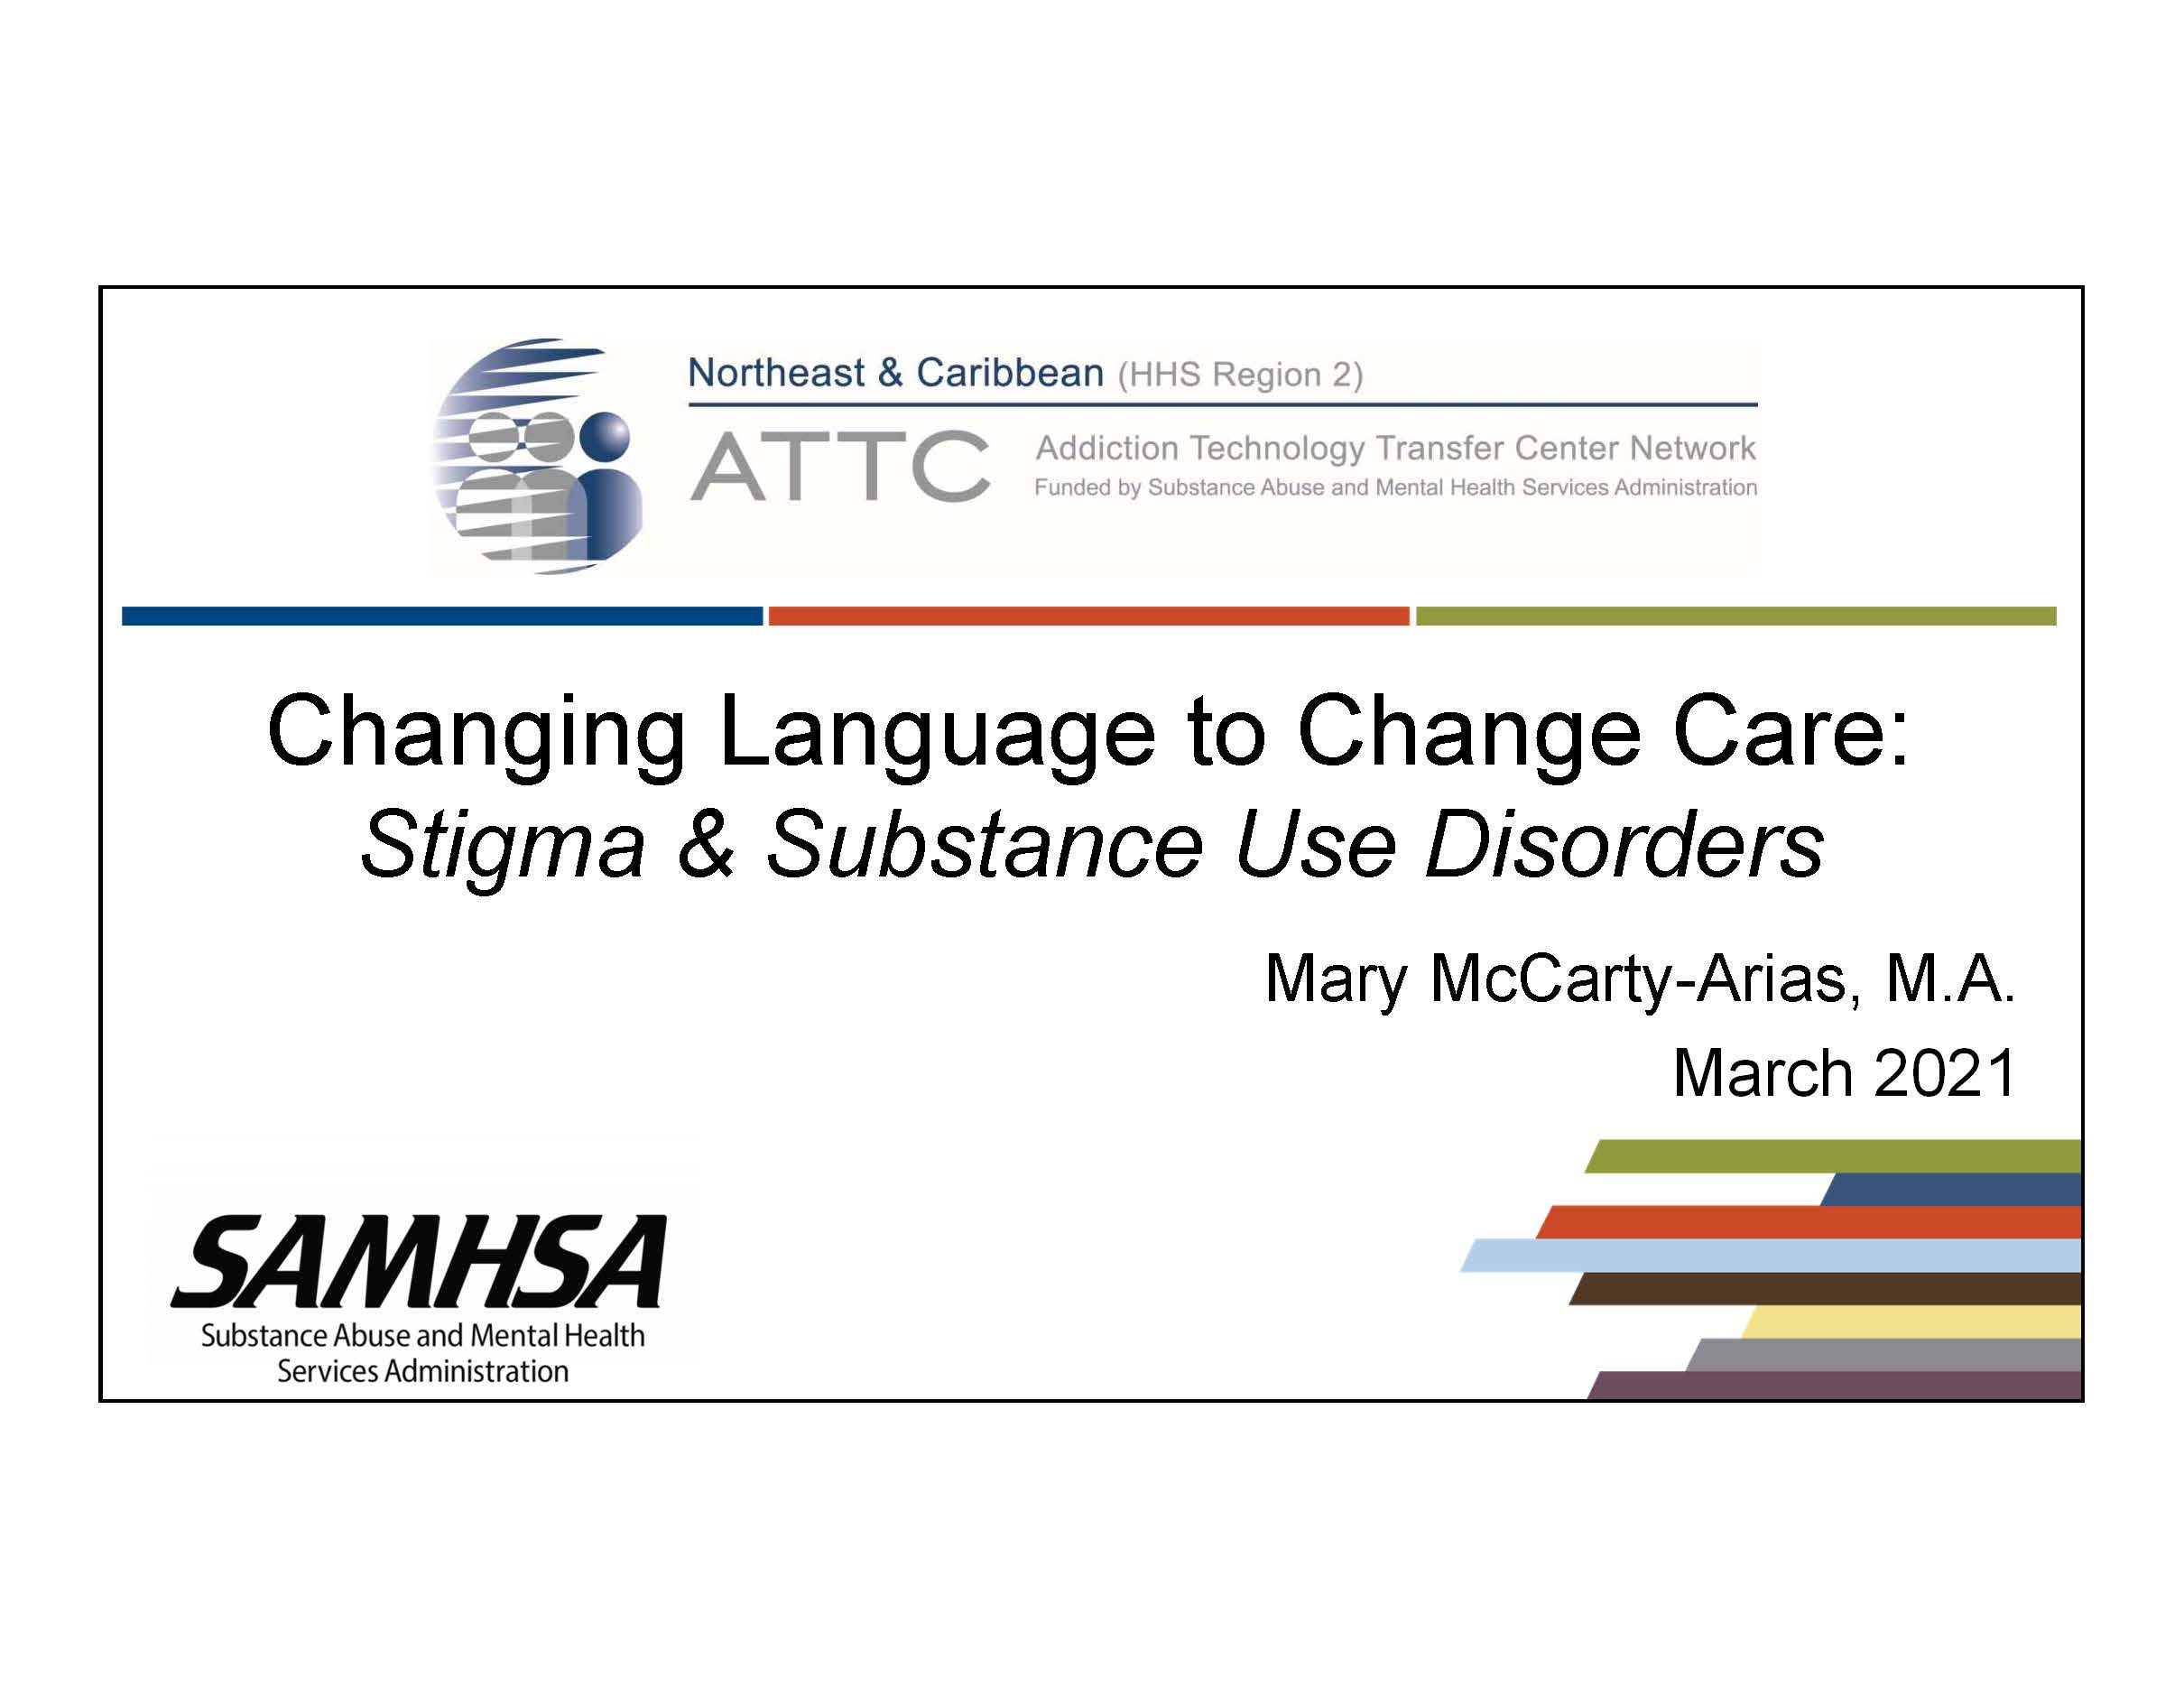 Changing Language to Change Care title page